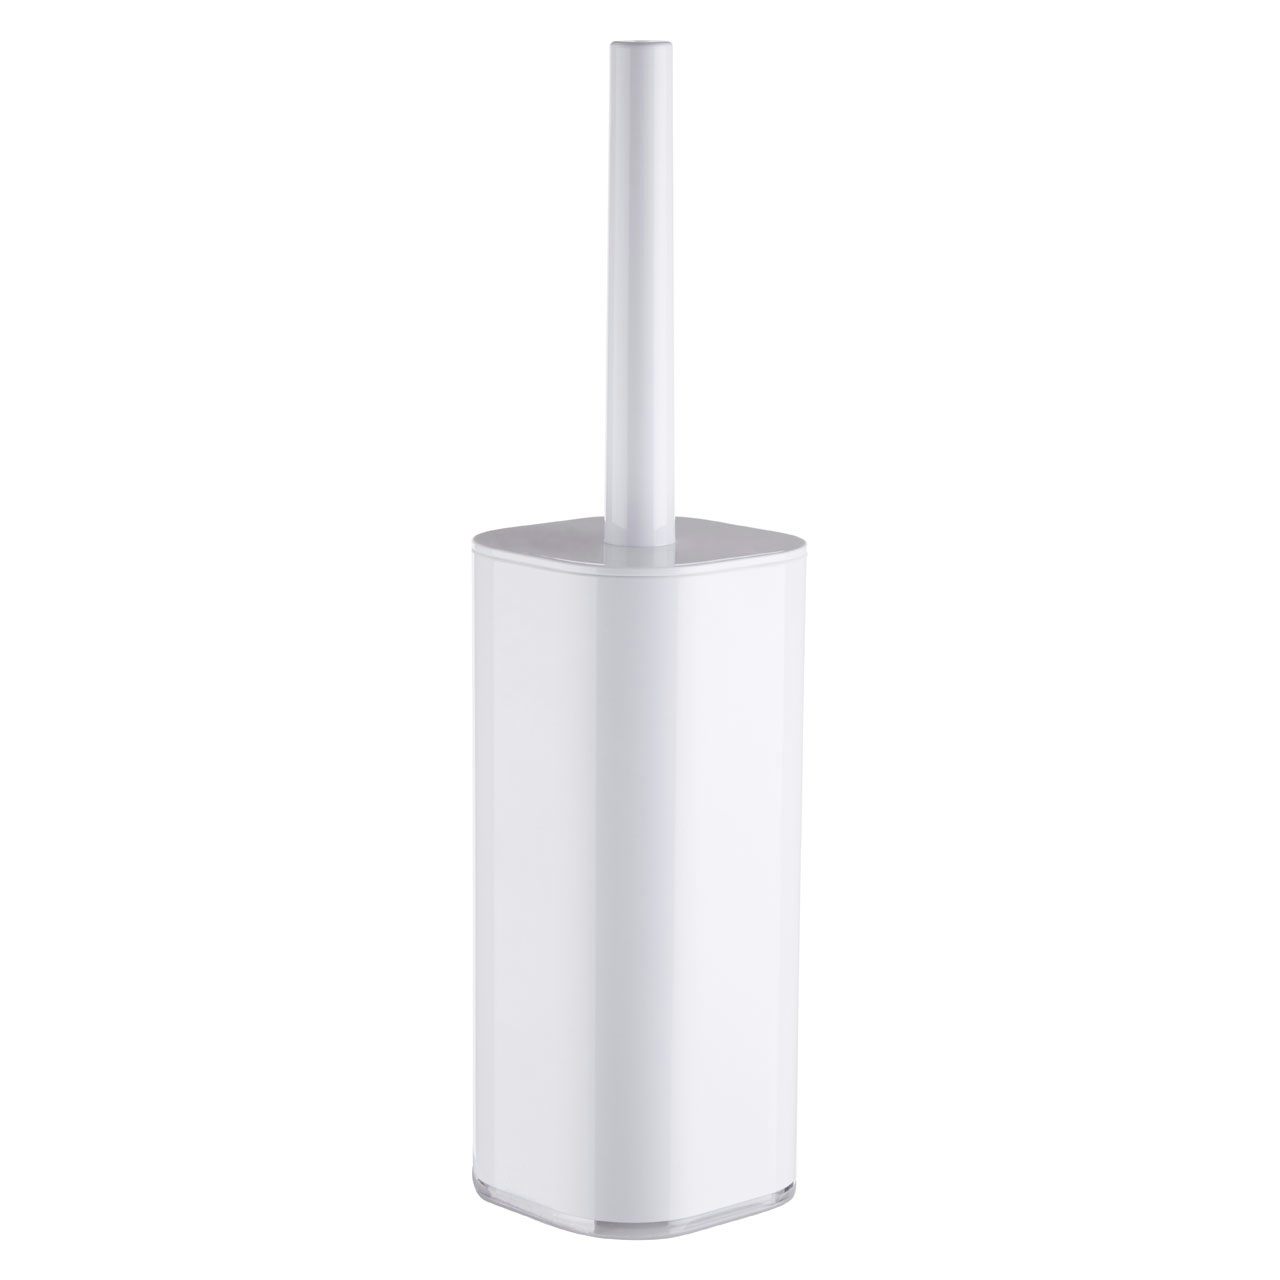 Accents White acrylic toilet brush and holder